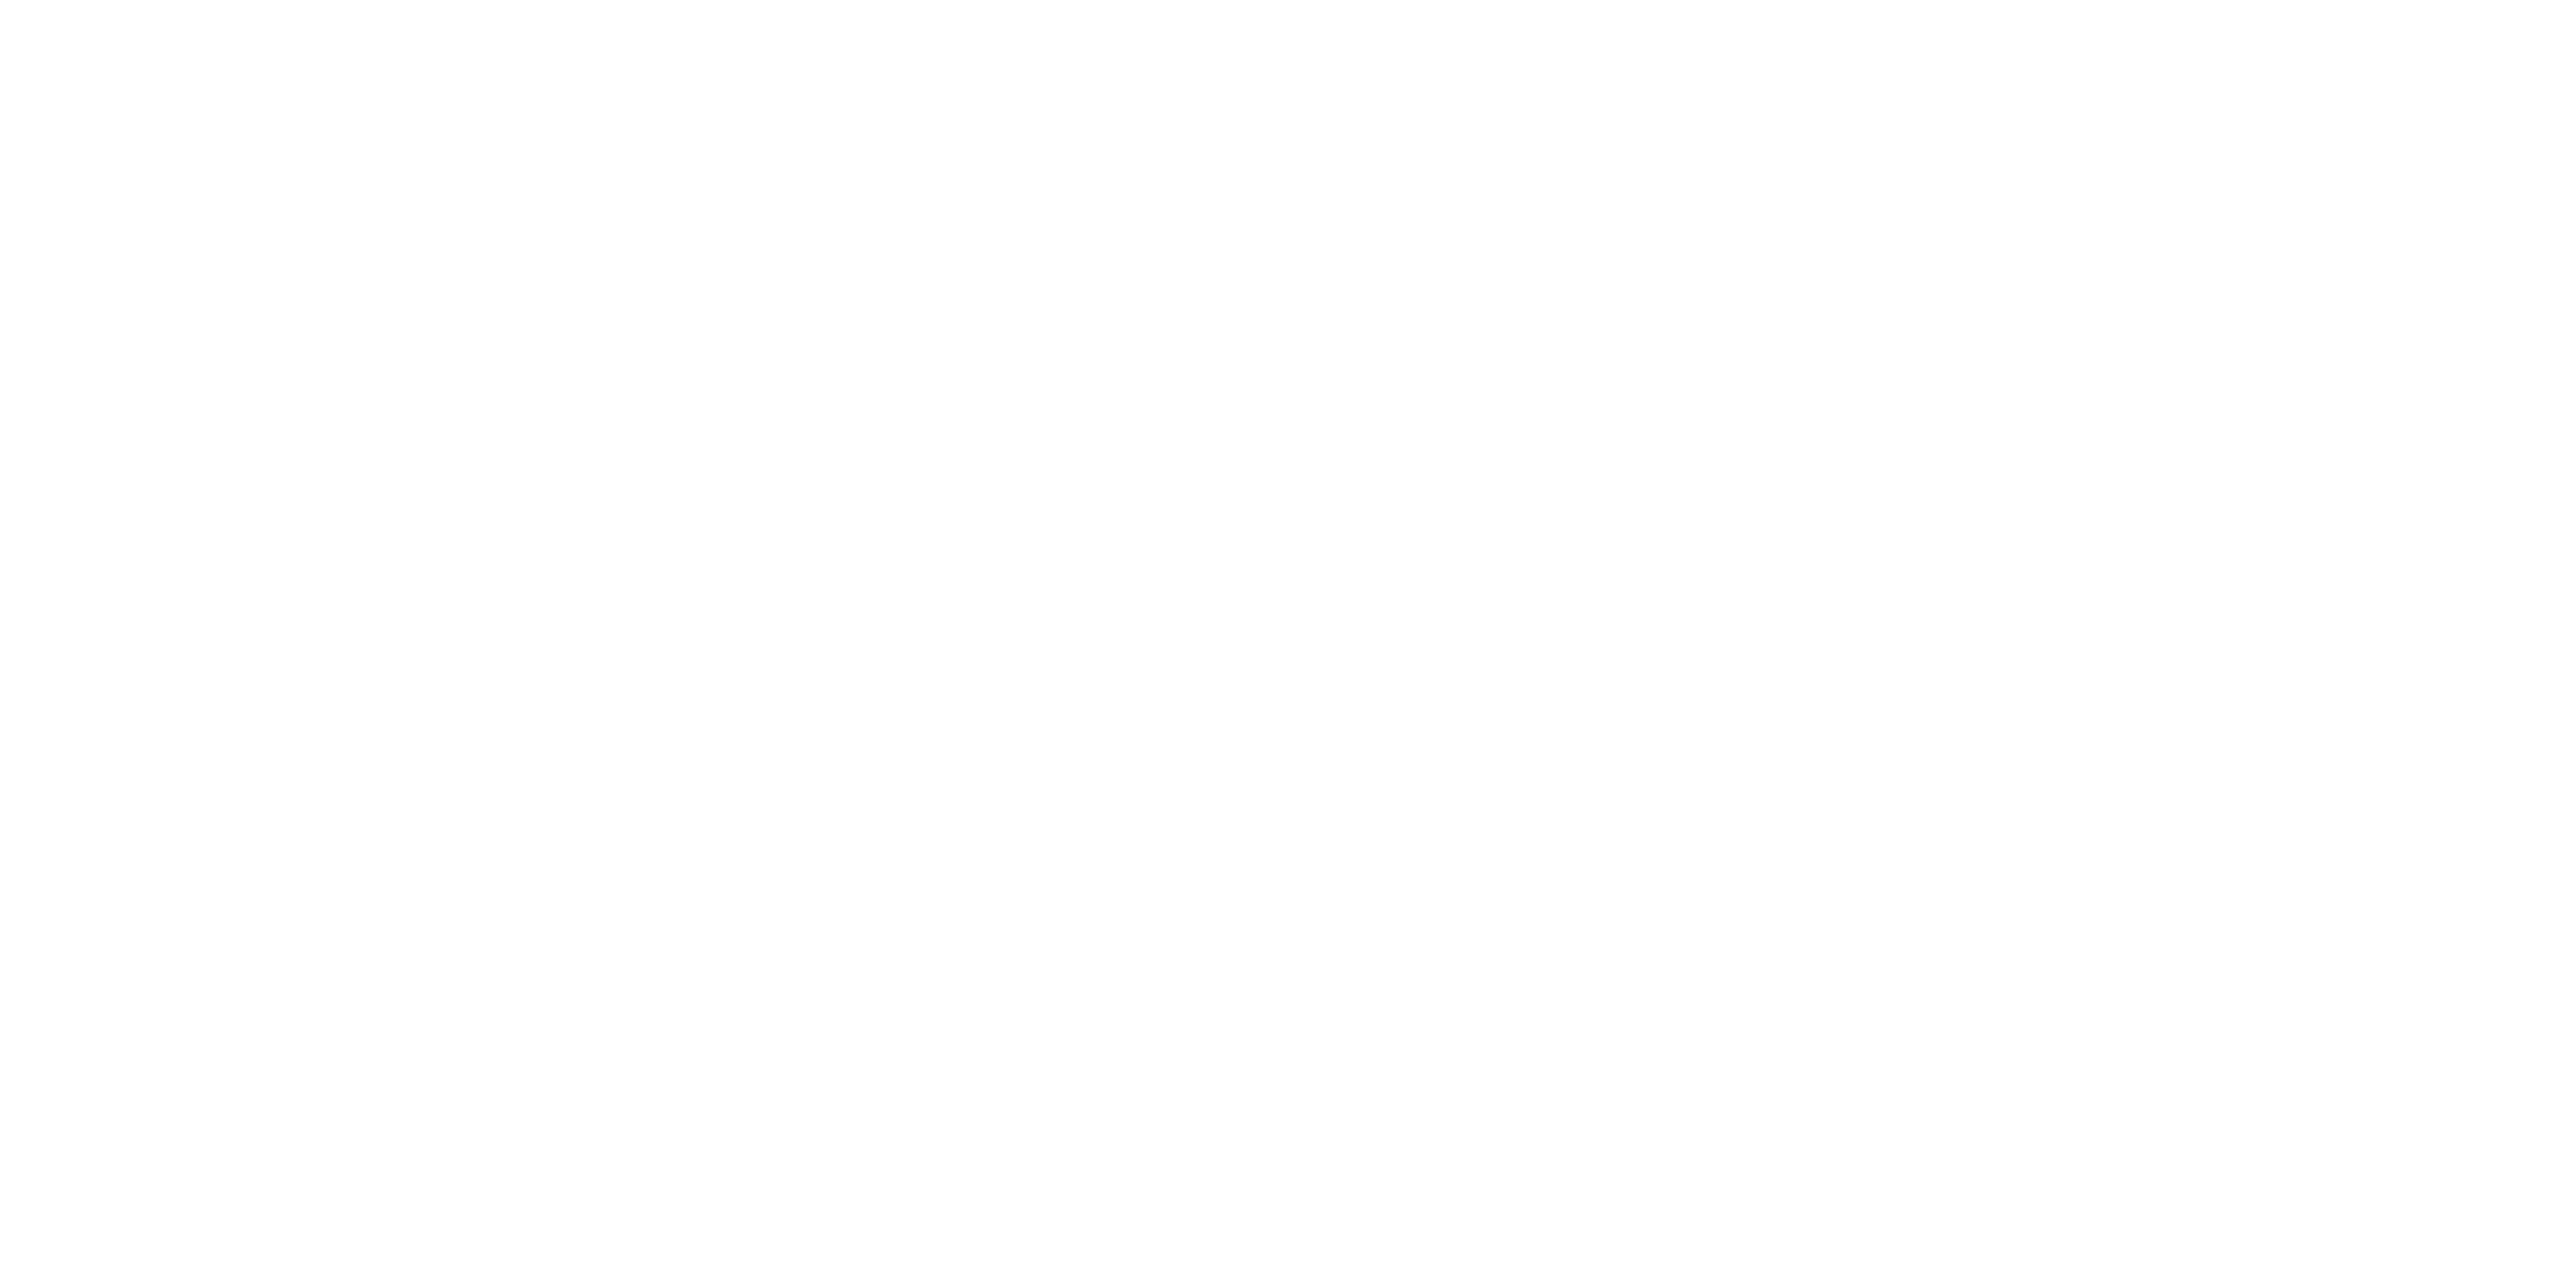 https://coolautomation.com/wp-content/uploads/sites/2/2022/01/Diagram_underfloor-heating.png